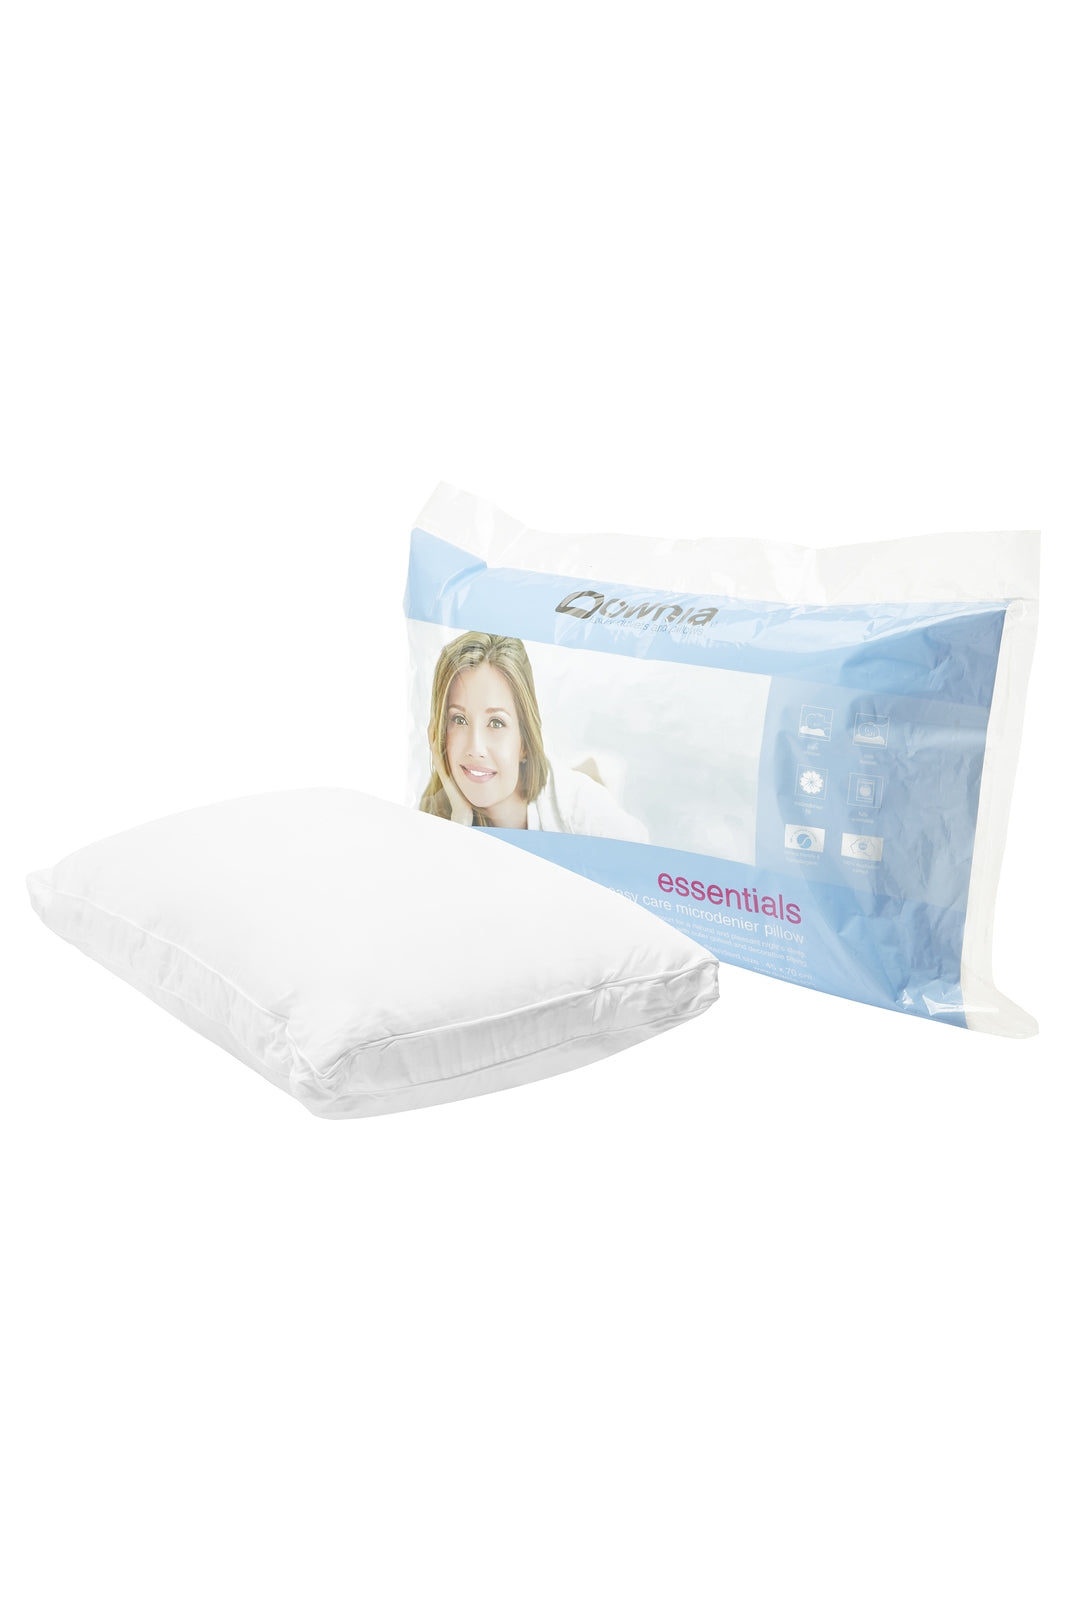 Downia Essentials Collection Pillow Standard